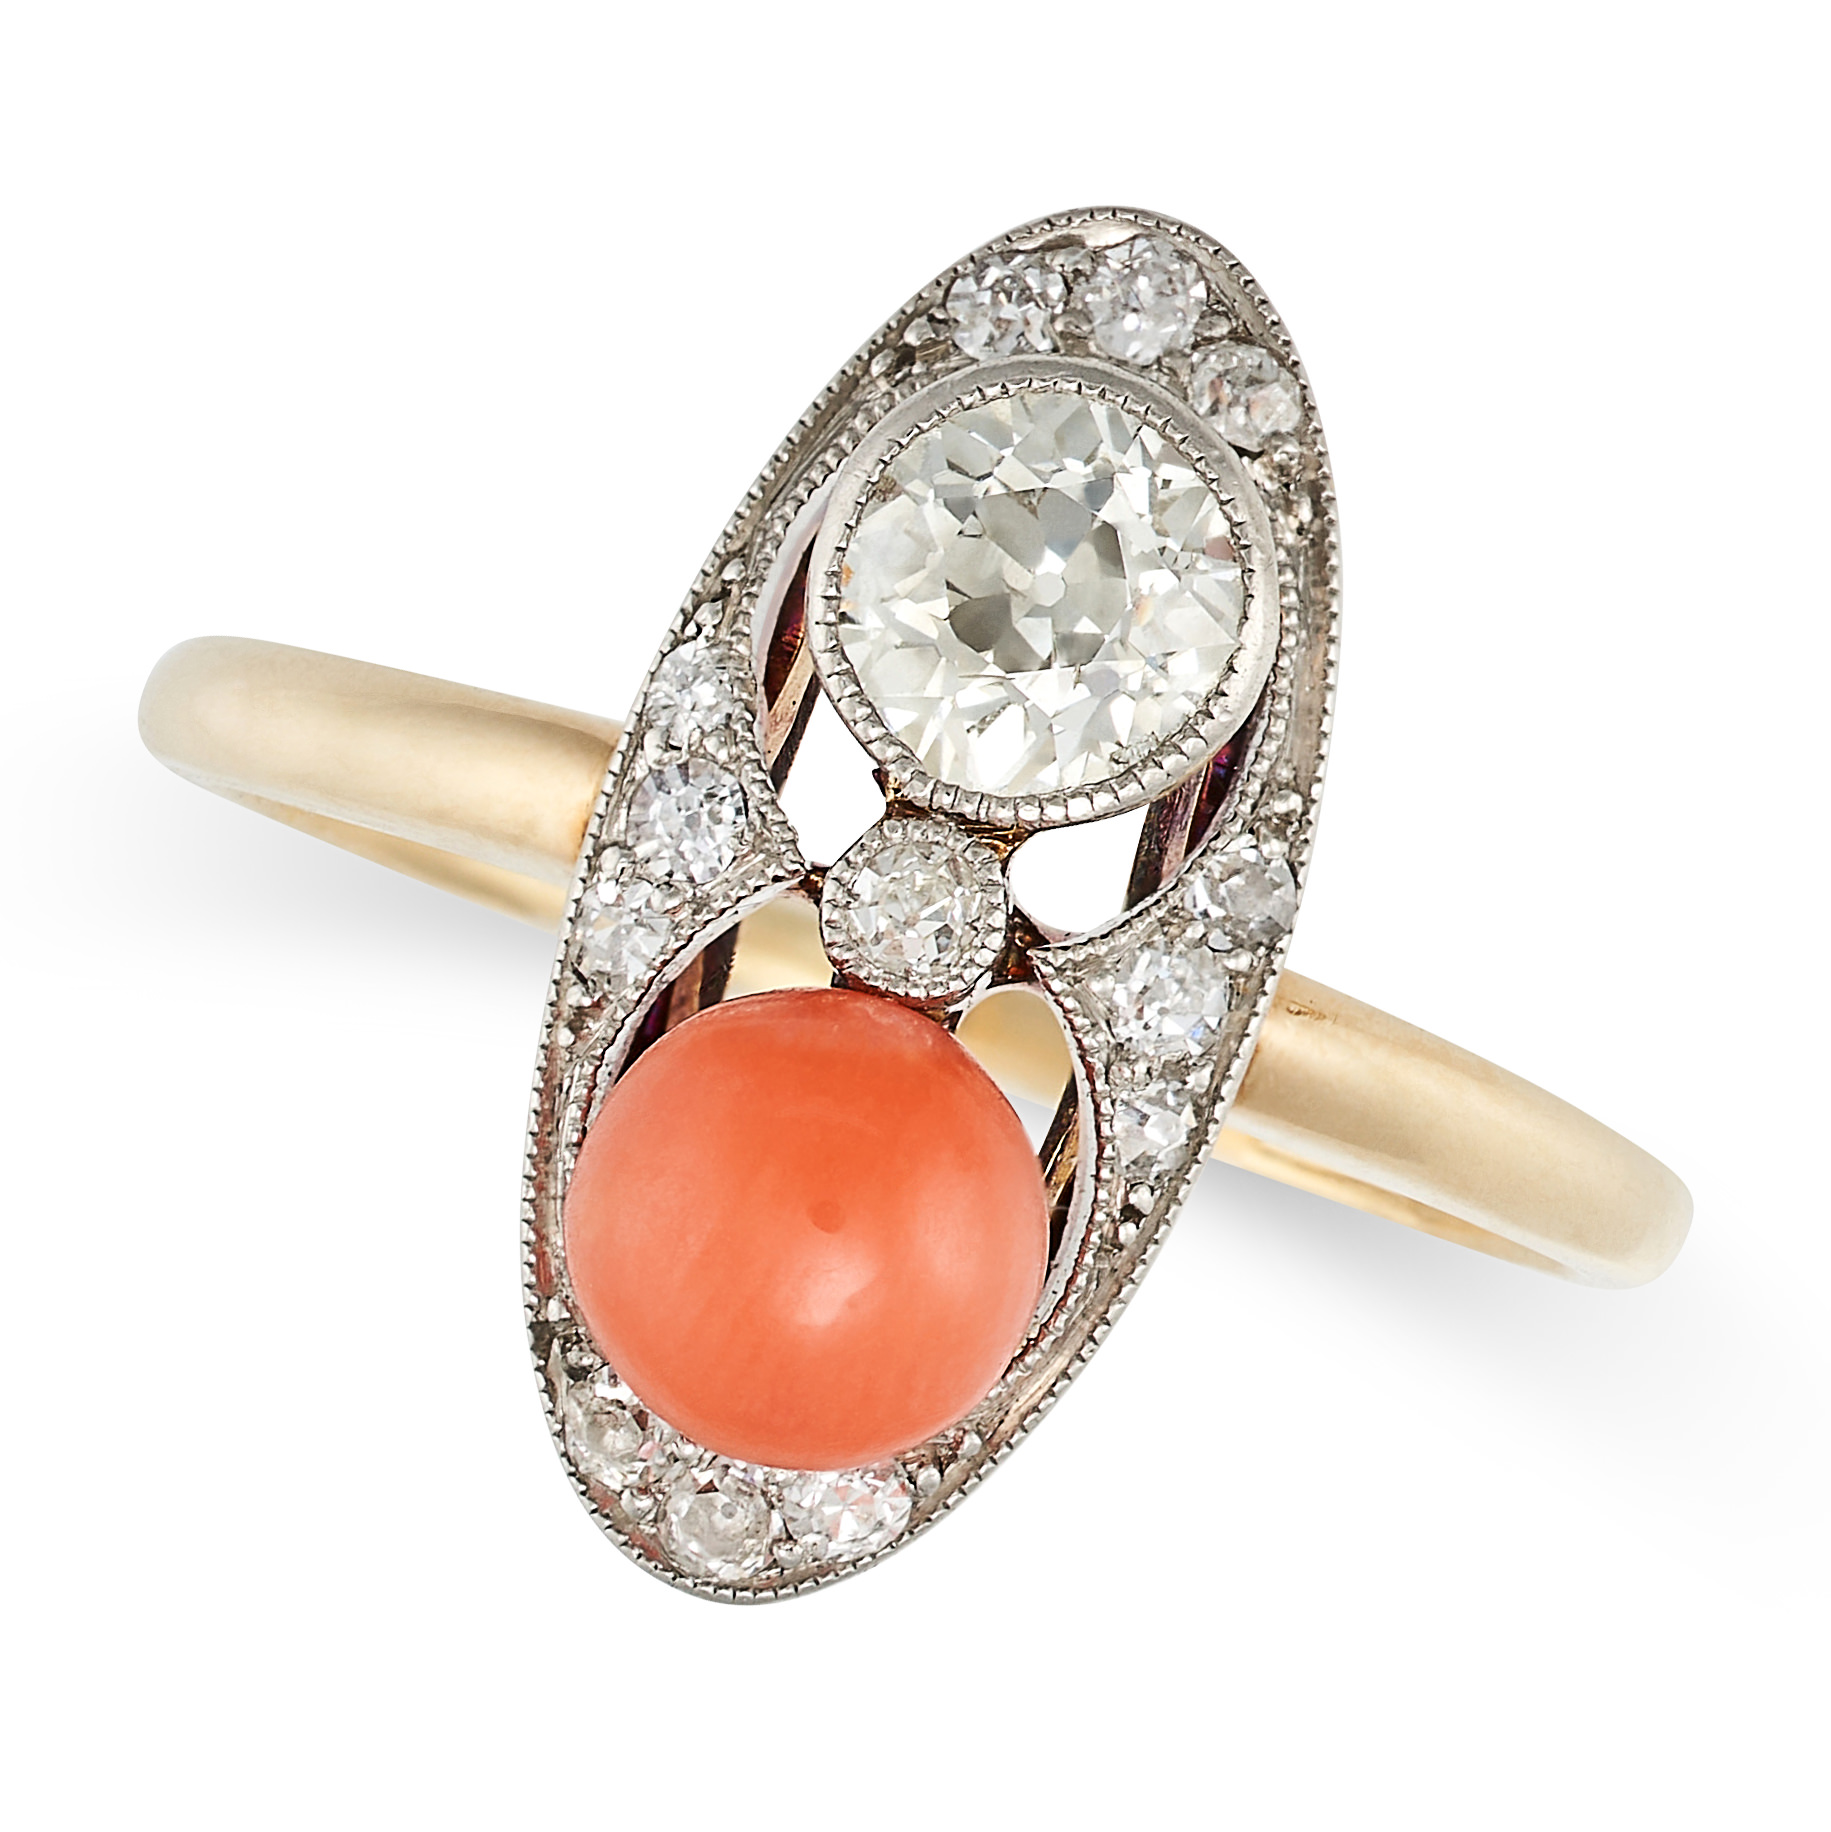 AN ANTIQUE CORAL AND DIAMOND RING, EARLY 20TH CENTURY in 14ct yellow gold, the oval face set with...